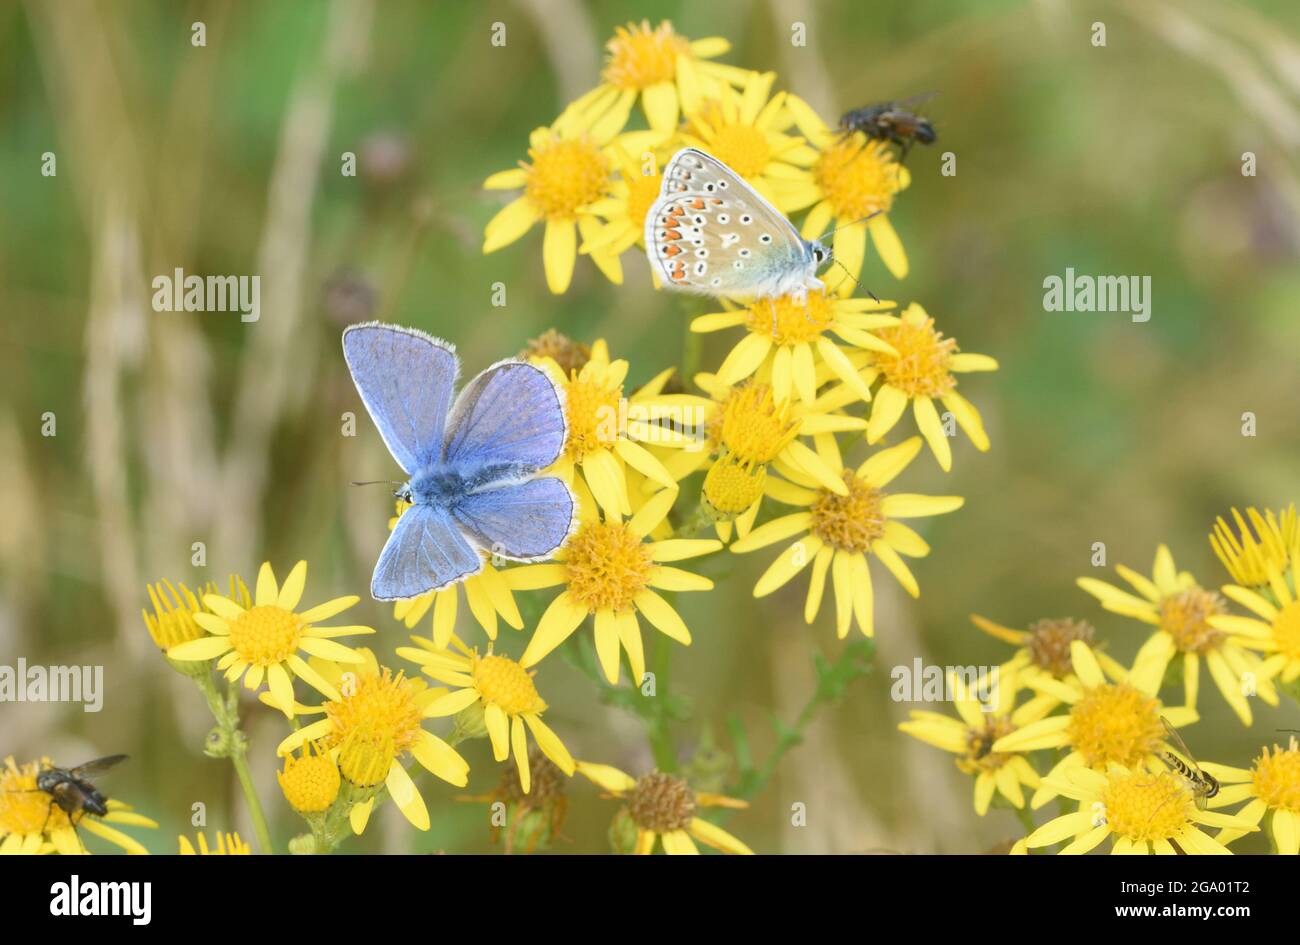 Male common blue butterflies (Polyommatus Icarus) on an a common ragwort (Senecio jacobaea) flower head in a grassy meadow, which is its favoured habi Stock Photo